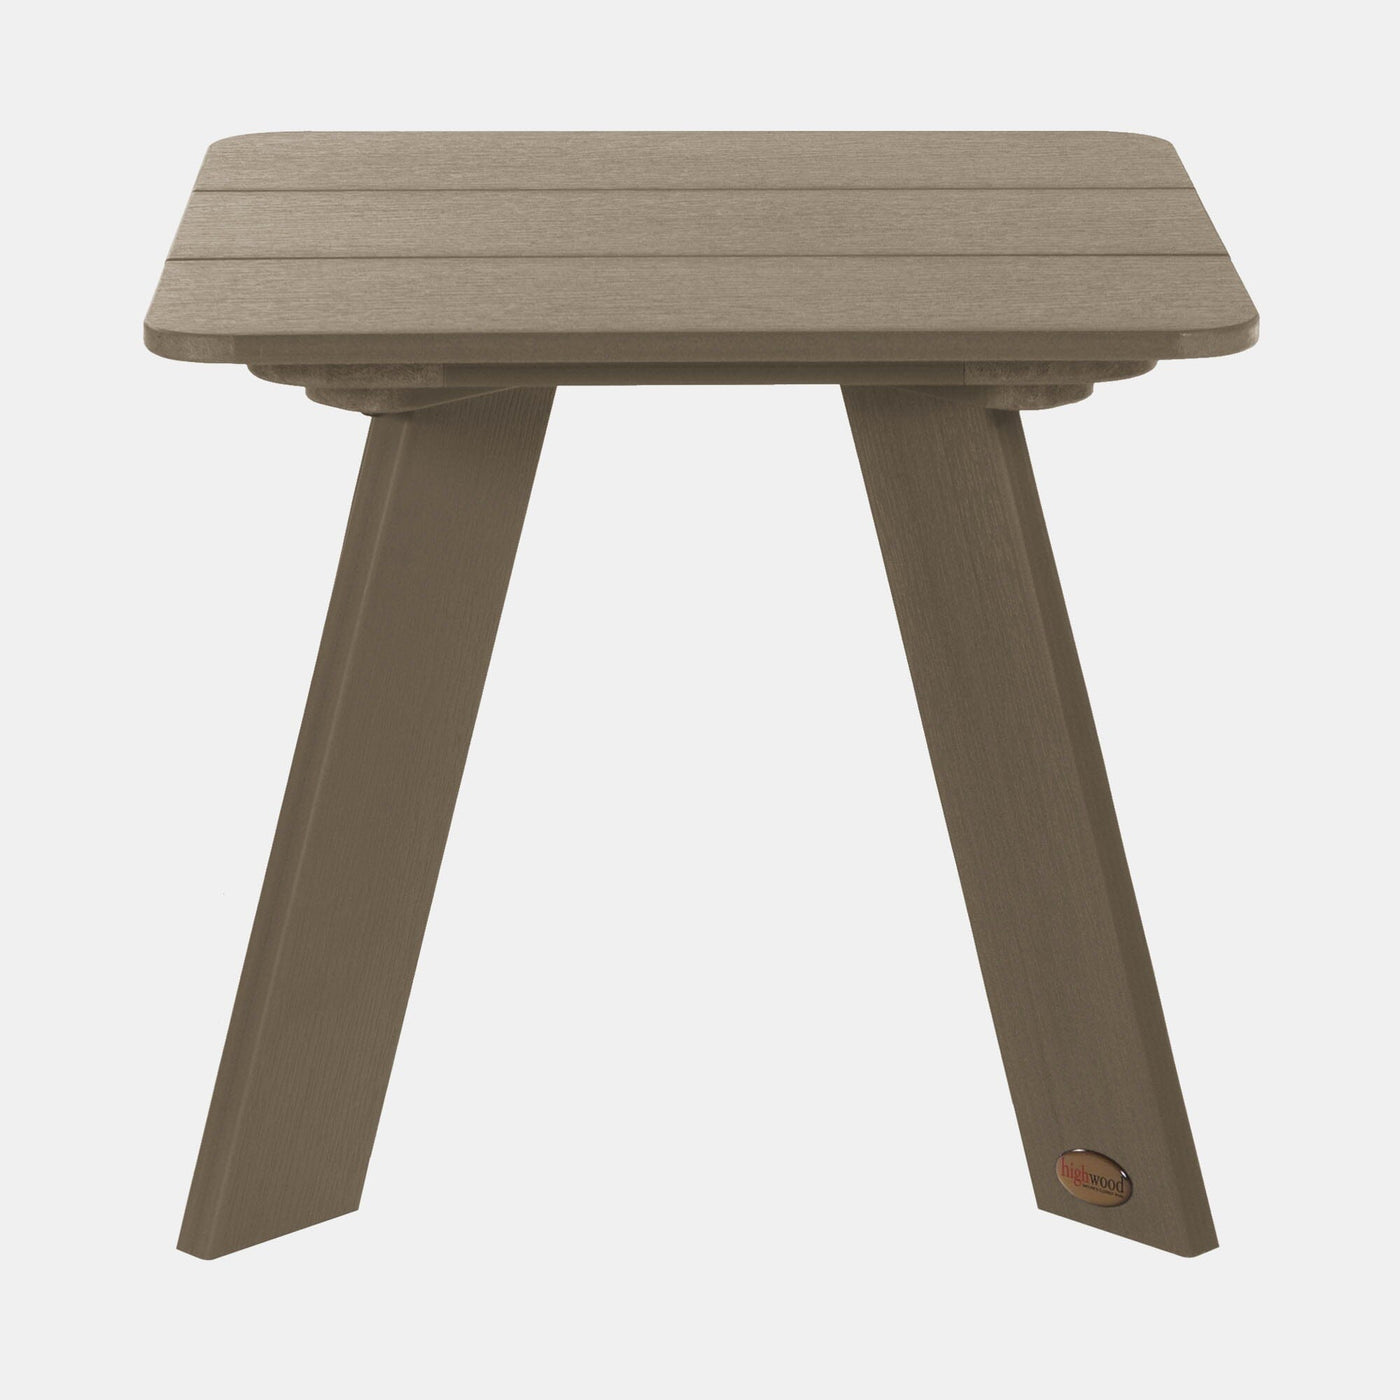 Front view of Italica Modern side table in Woodland brown